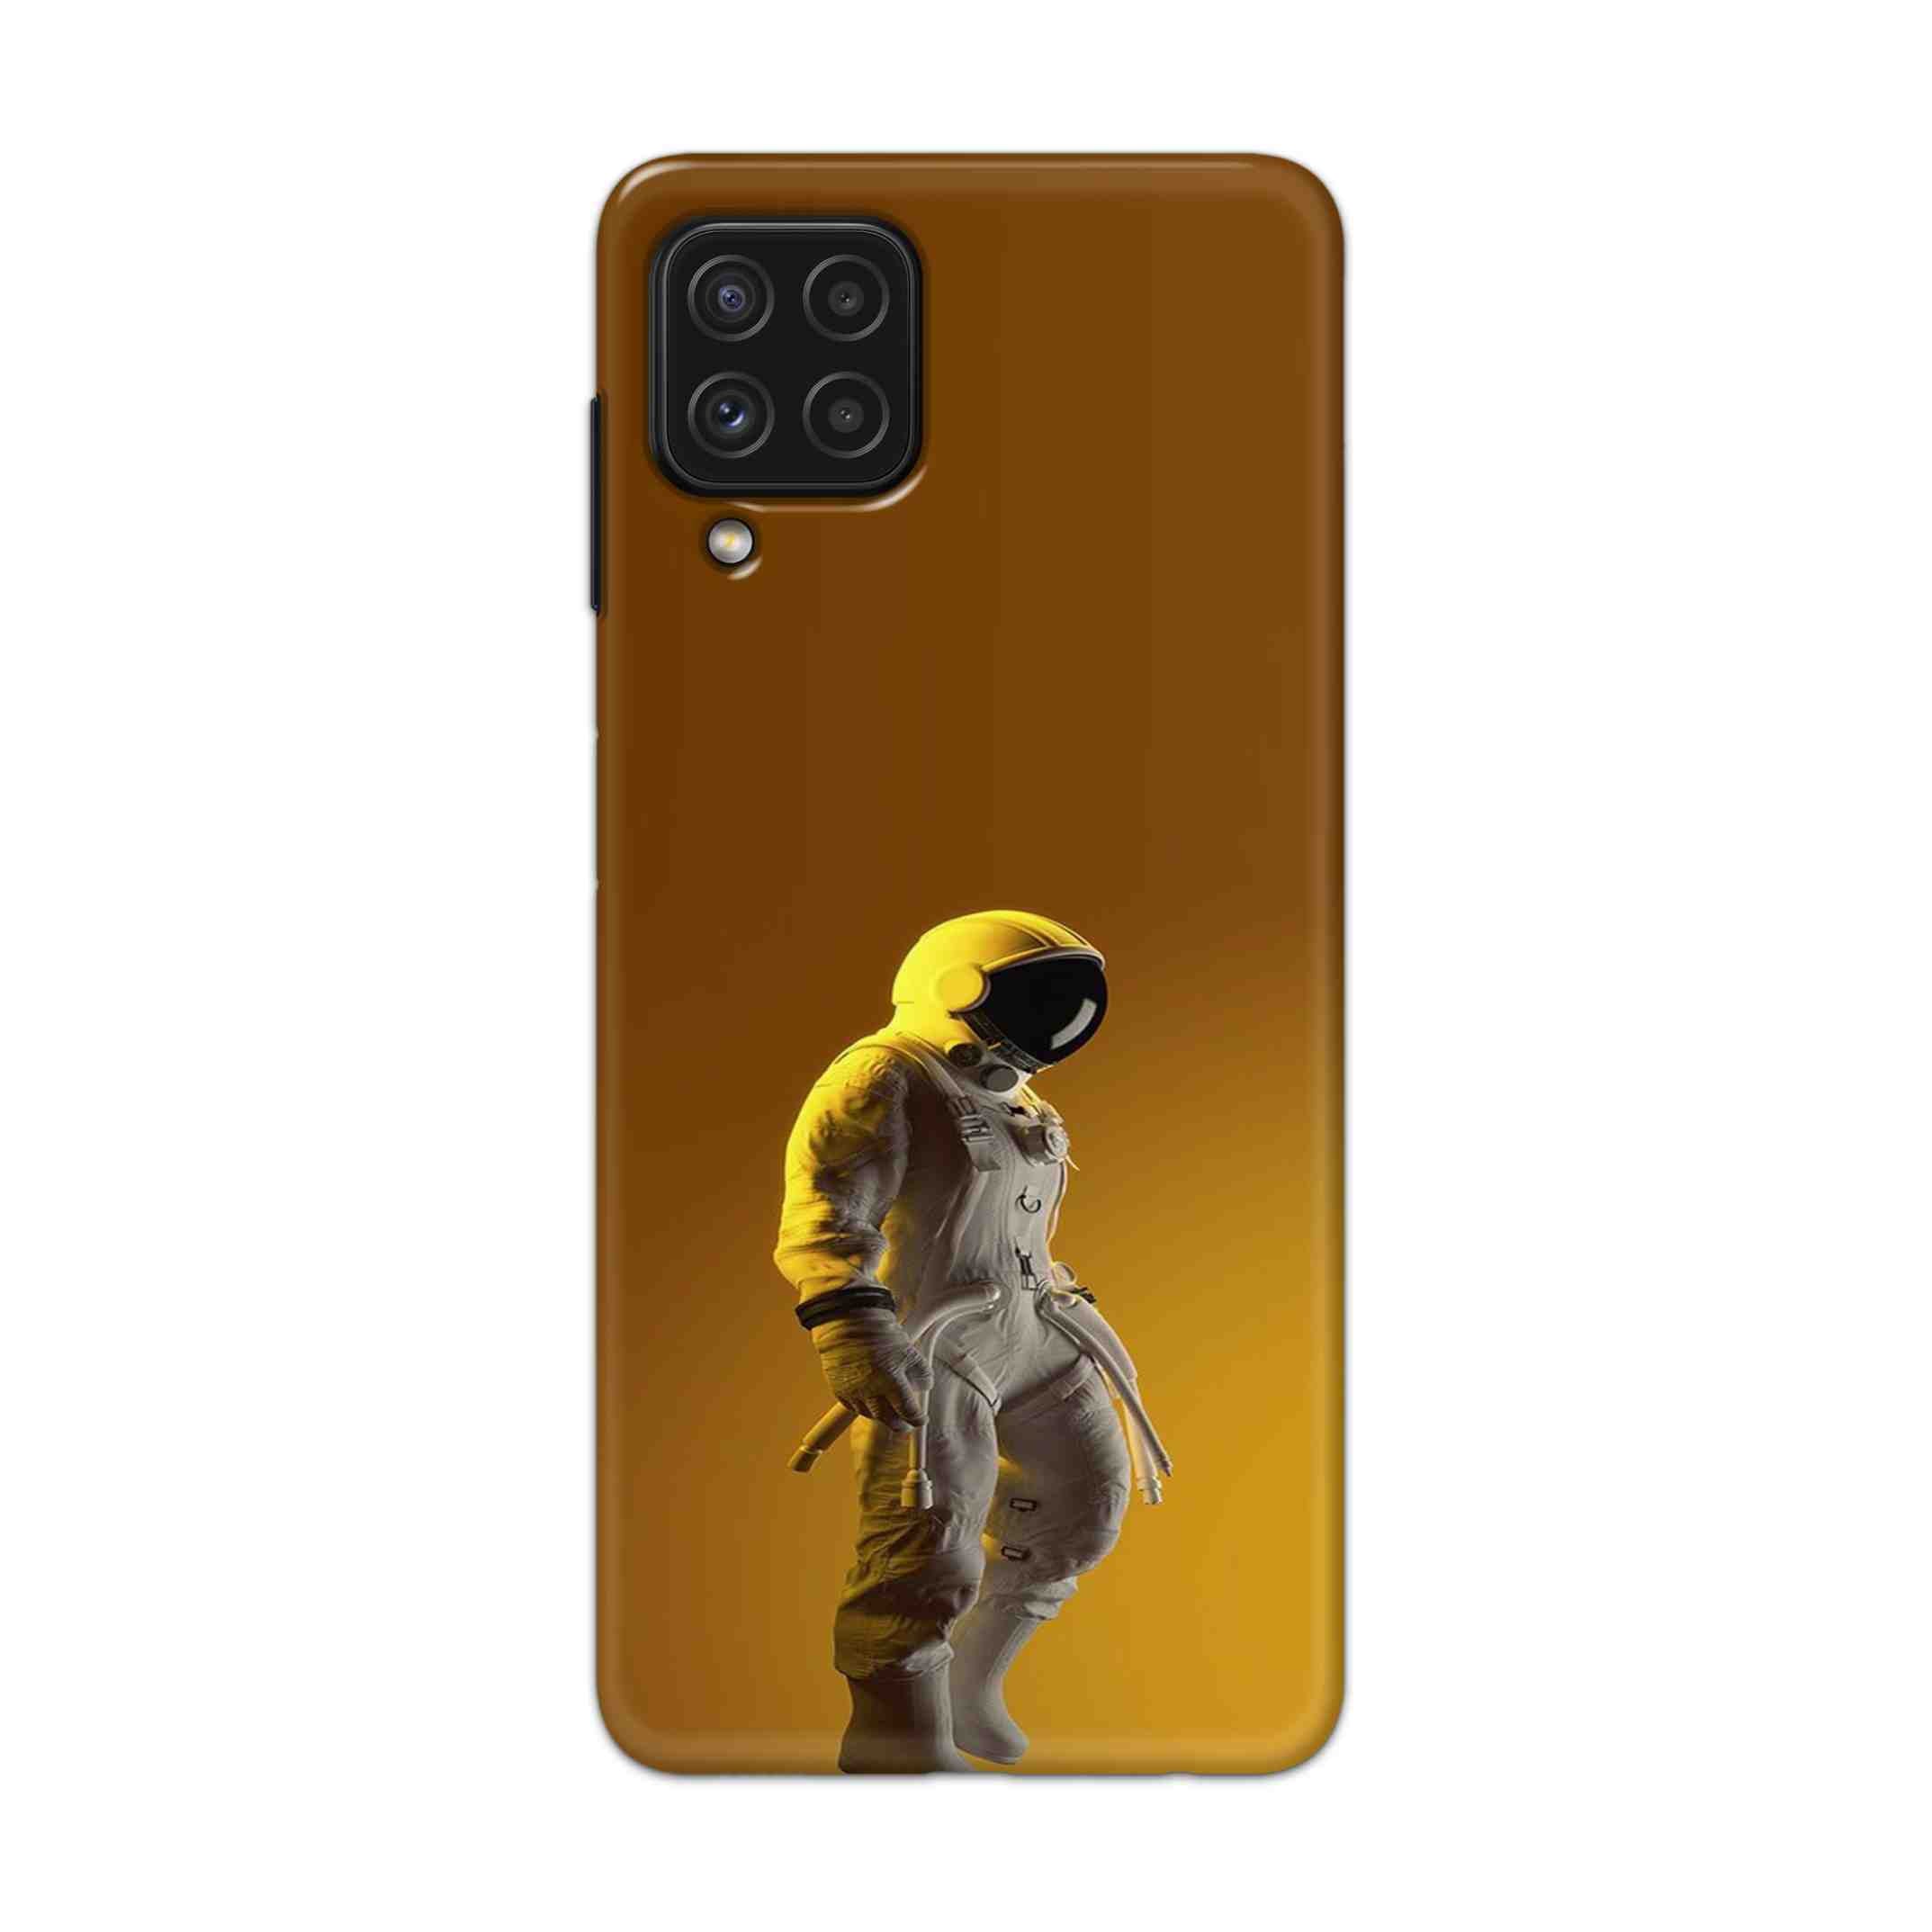 Buy Yellow Astronaut Hard Back Mobile Phone Case Cover For Samsung Galaxy A22 Online